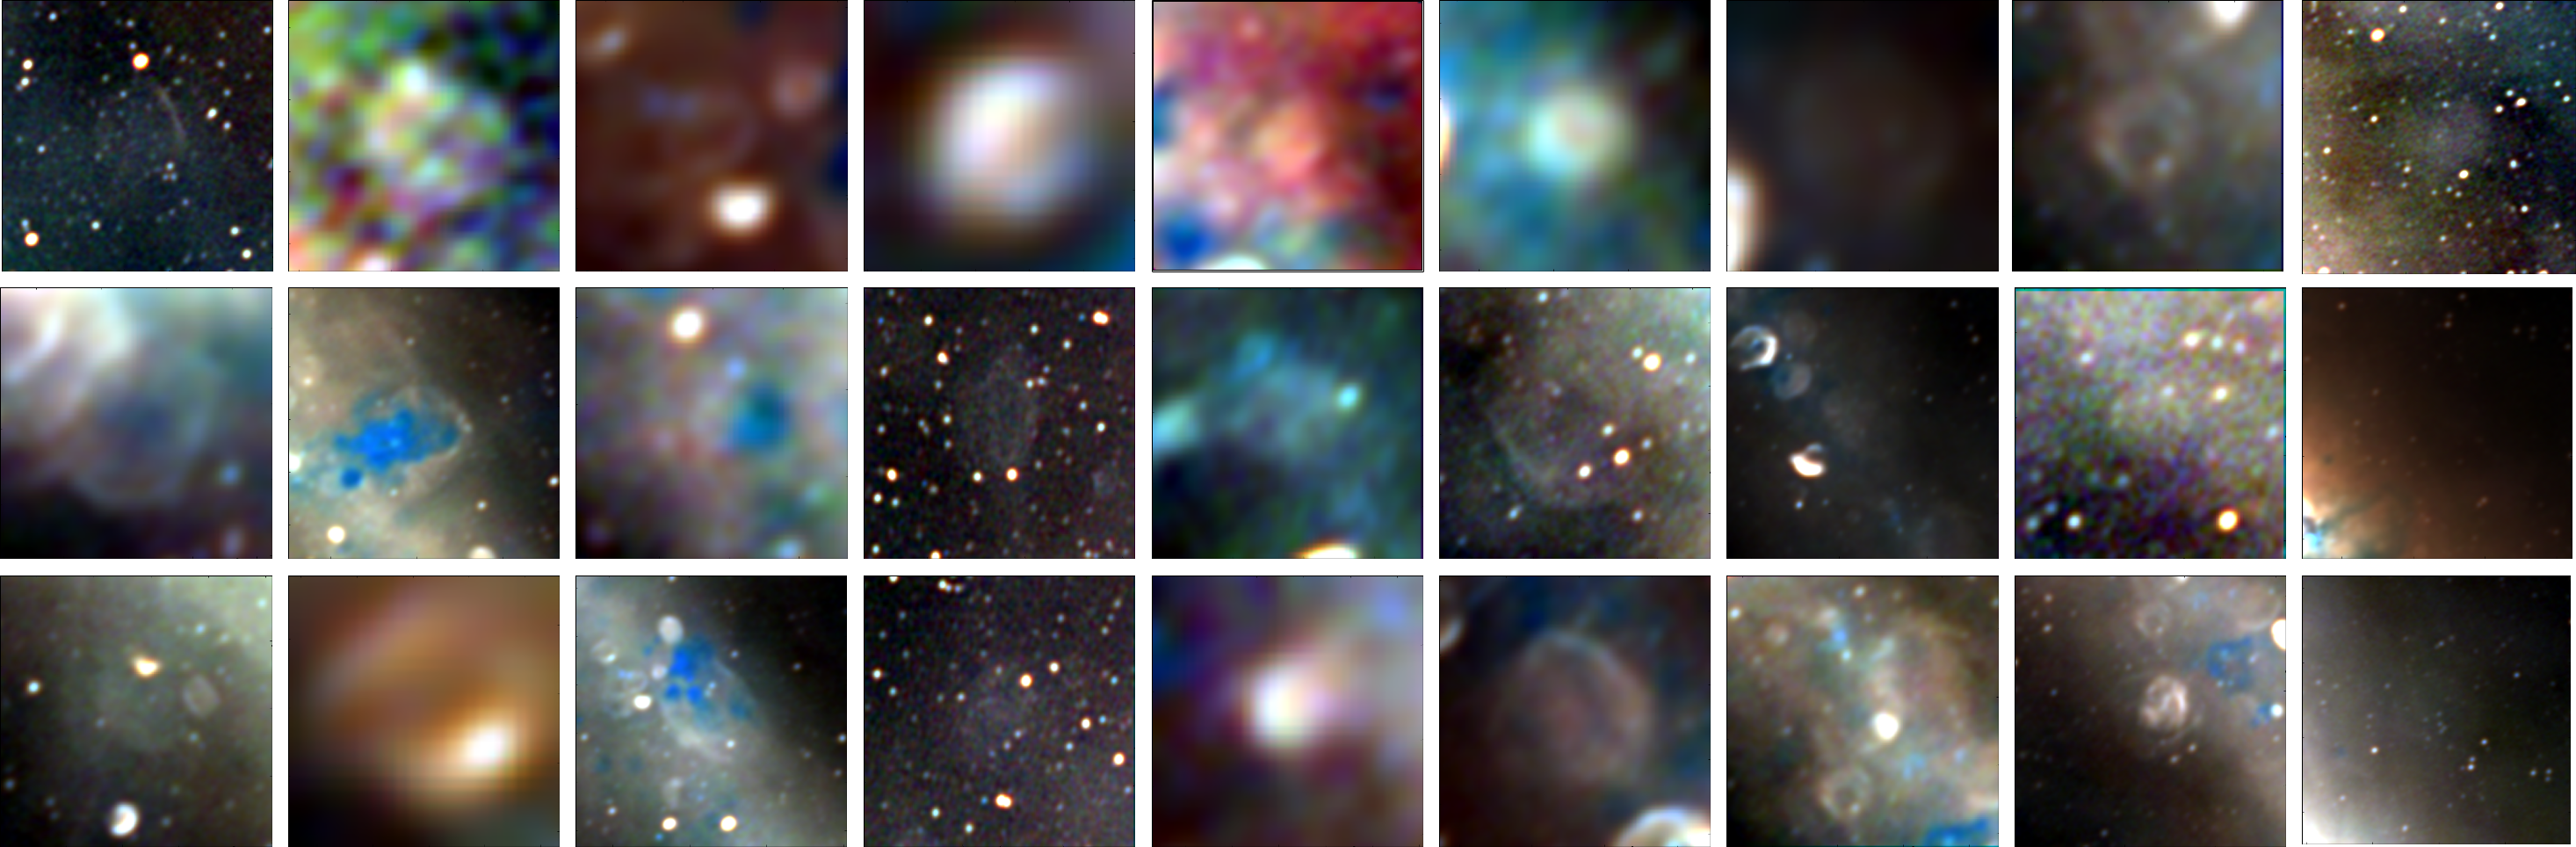 A gallery of the 27 new supernova remnants discovered